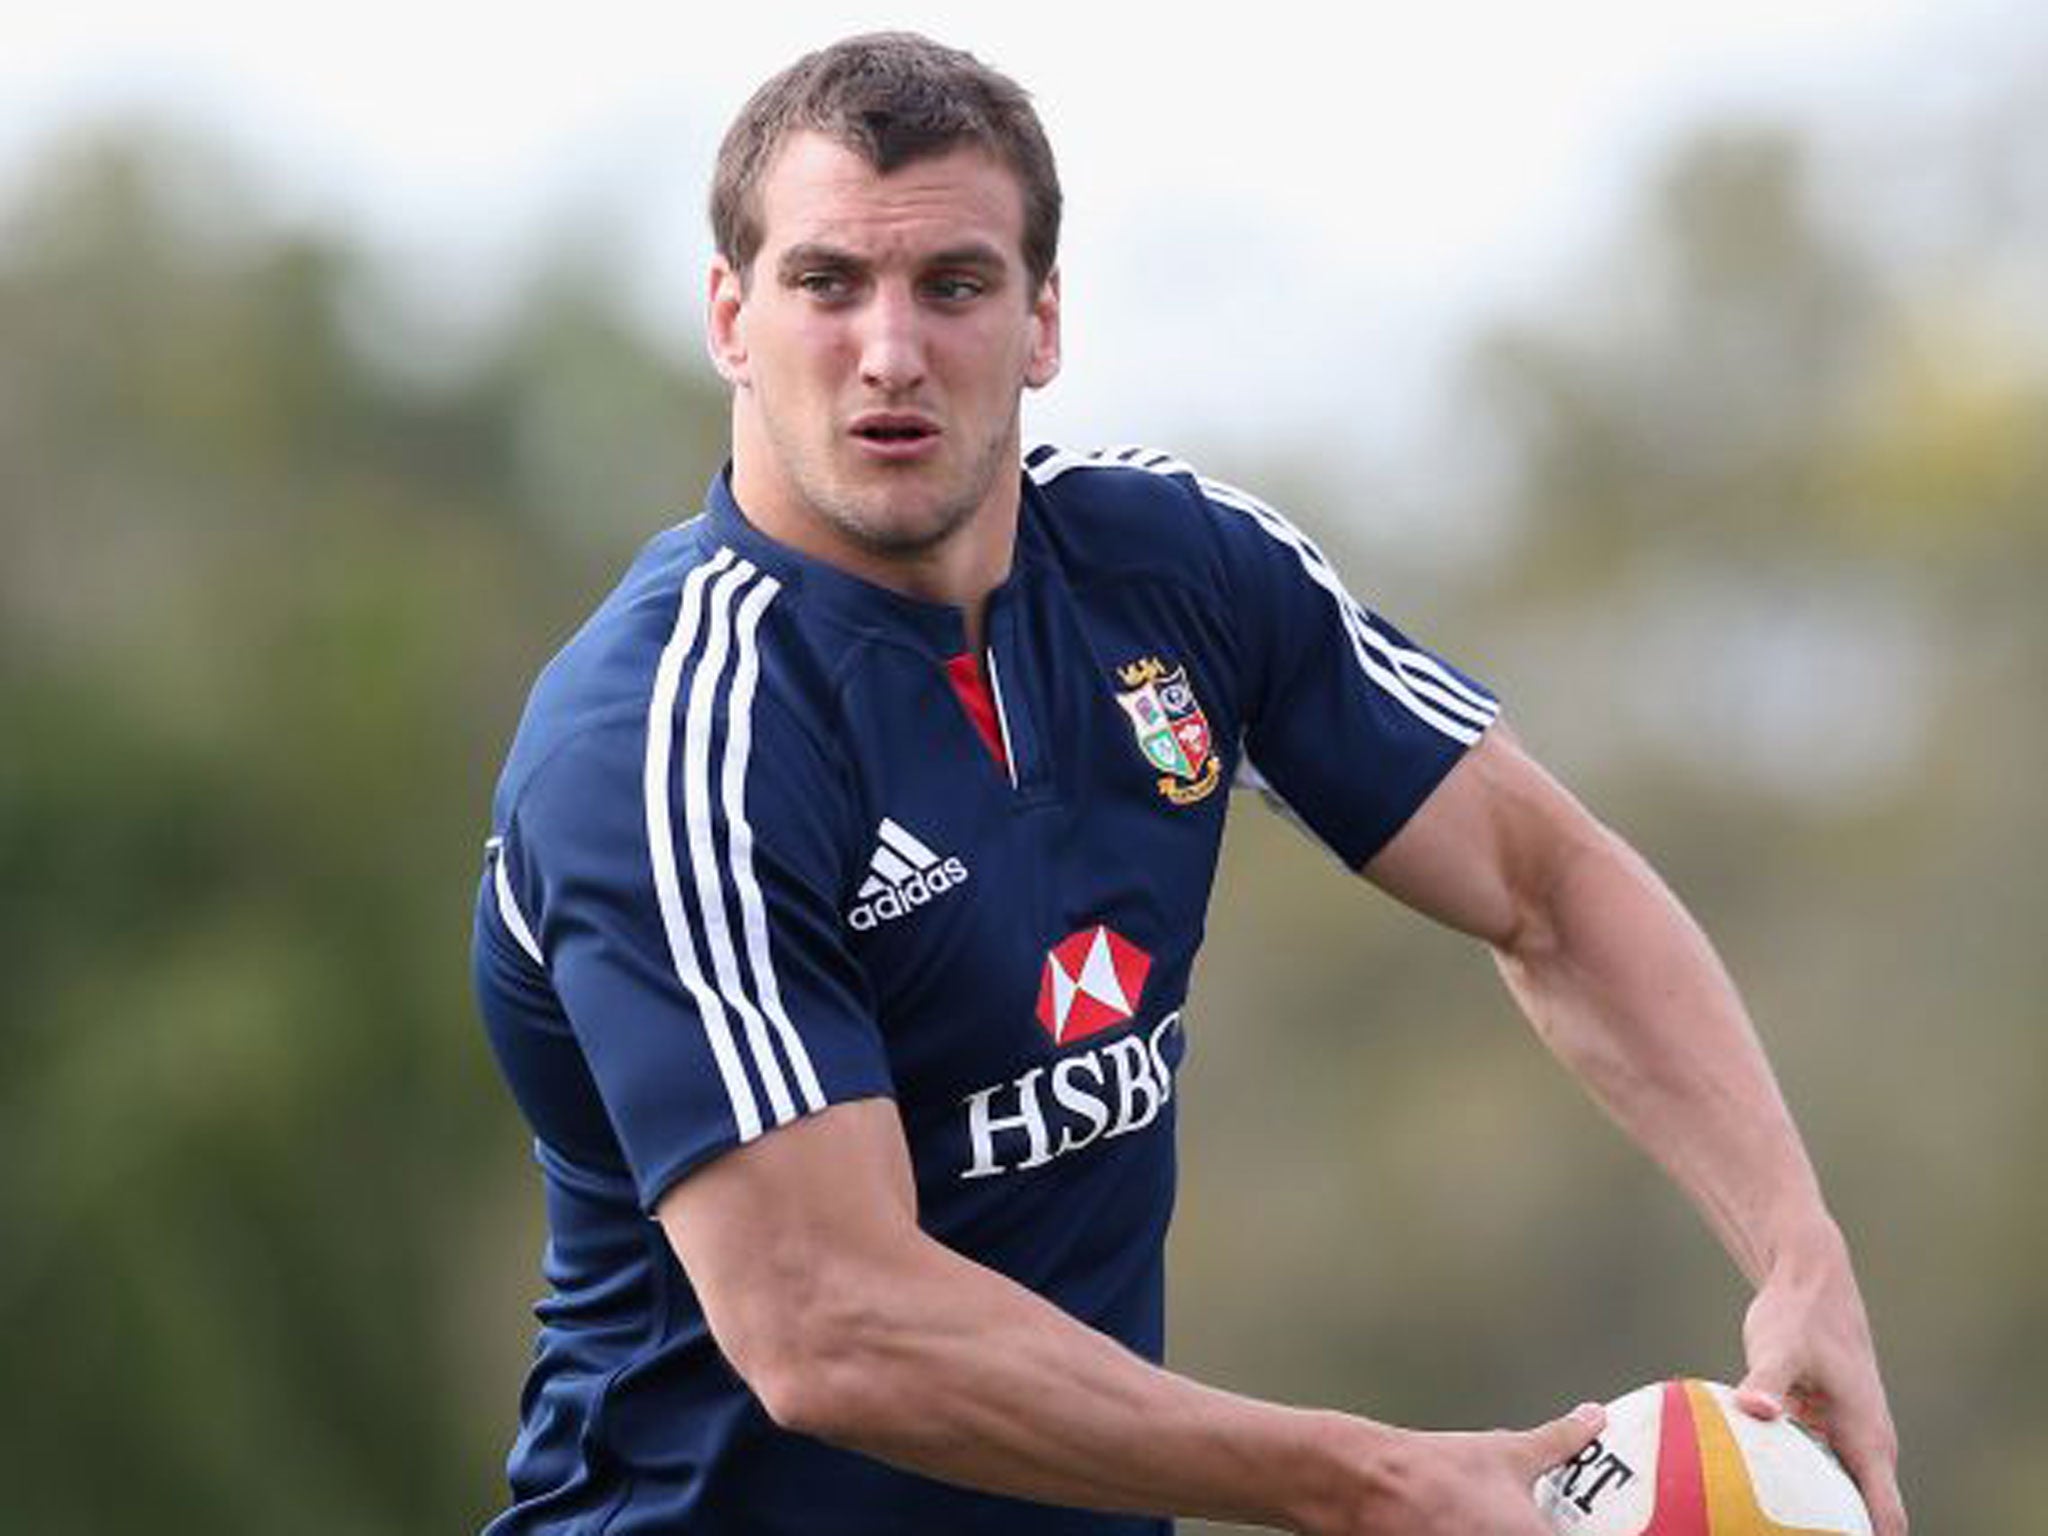 Lions captain Sam Warburton takes to the training field in readiness for battle